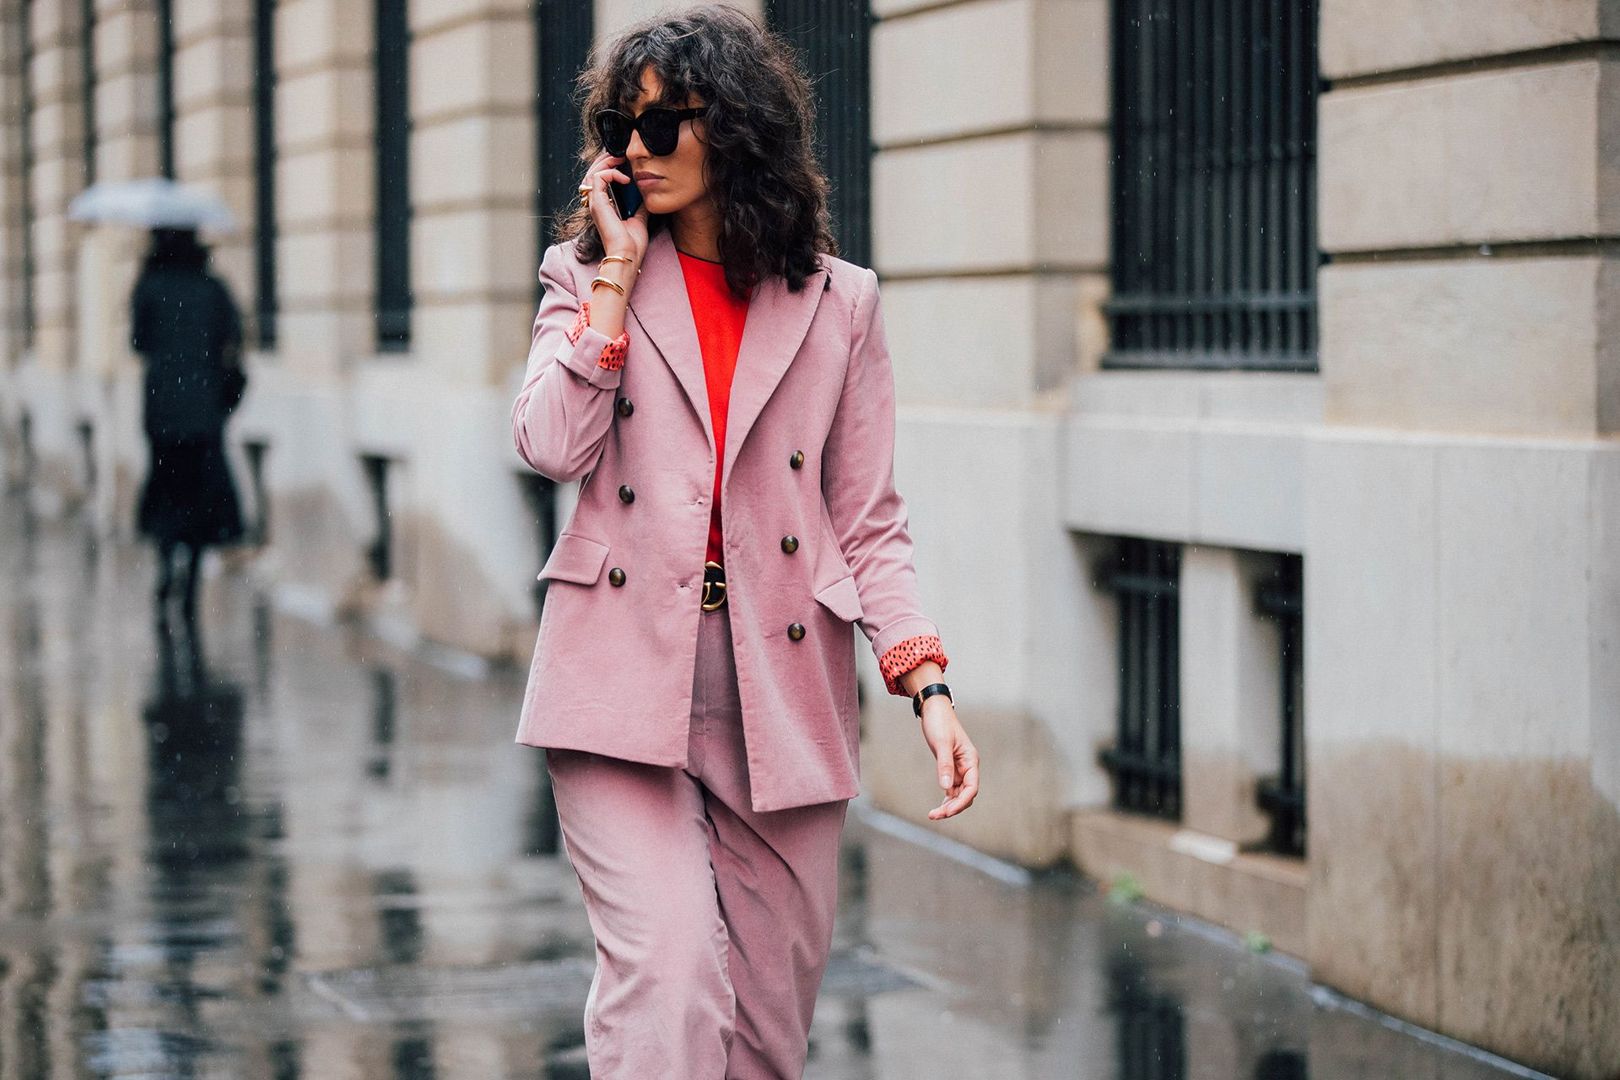 Trending: Suit Up In Style